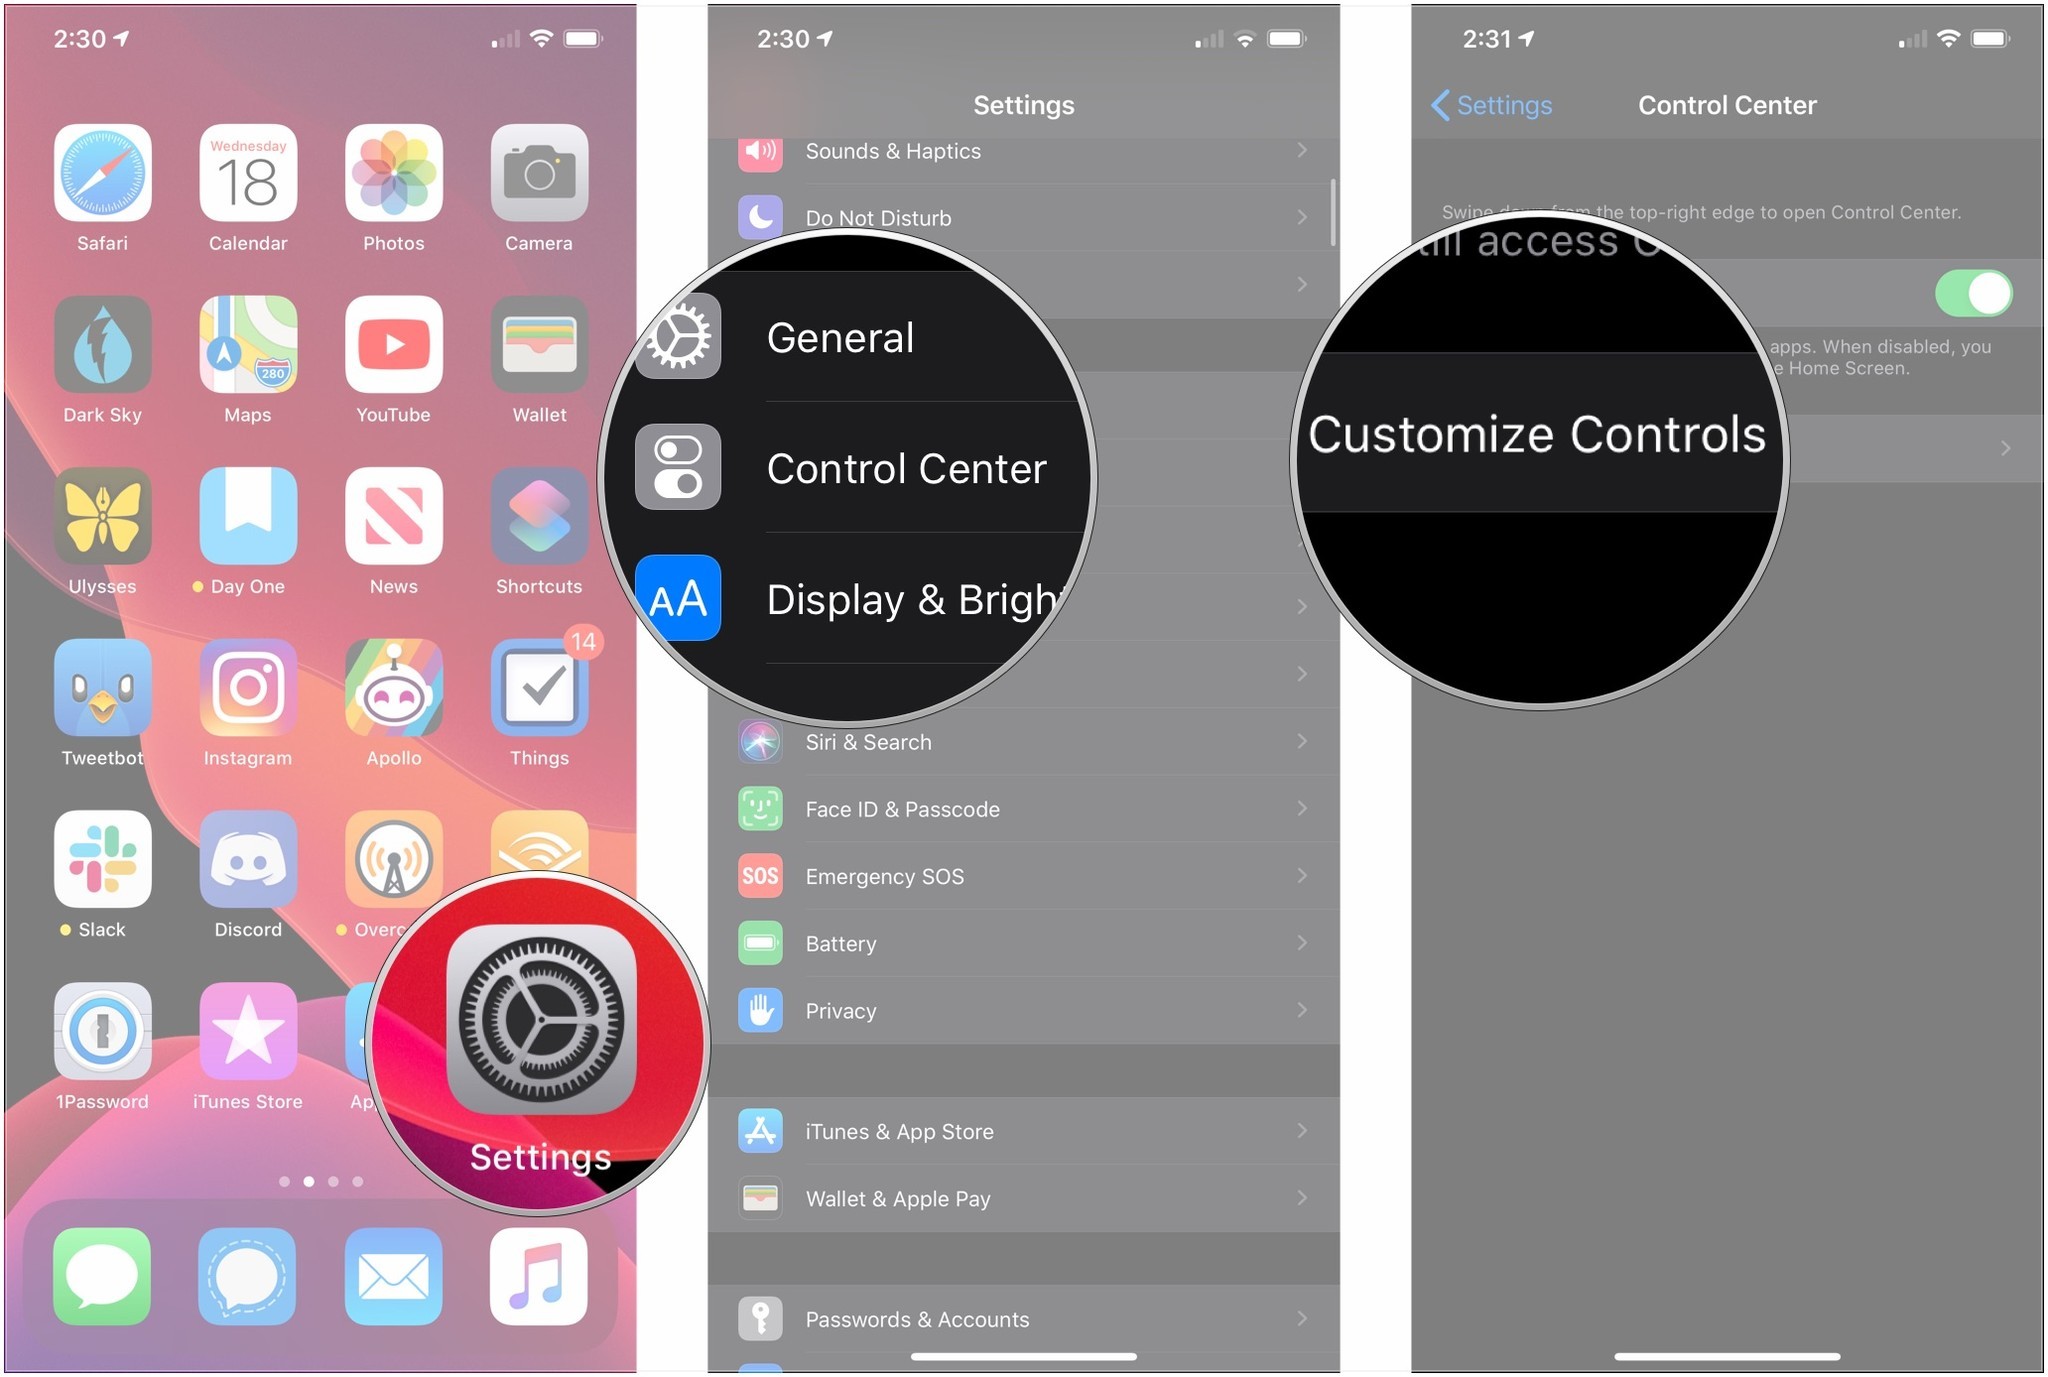 Open Settings, tap Control Center, tap Customize Contorls